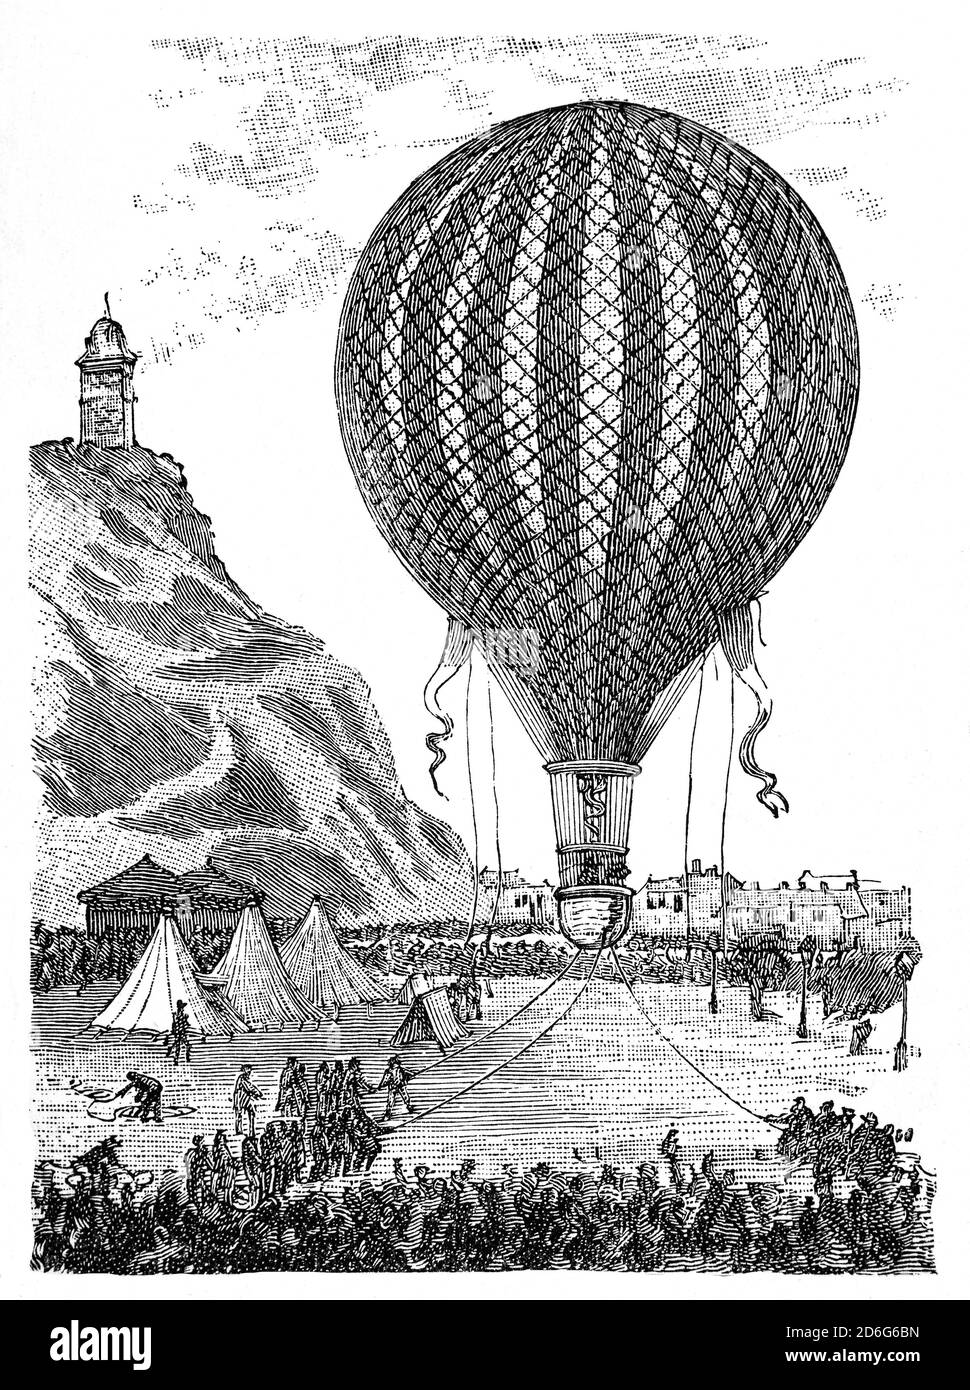 The Siege of Paris, lasting from 19 September 1870 to 28 January 1871, and the consequent capture of the city by Prussian forces, led to French defeat in the Franco-Prussian War. During the seige, balloons served to carry the mail and diplomats outside the city safely from Prussian attack. Stock Photo